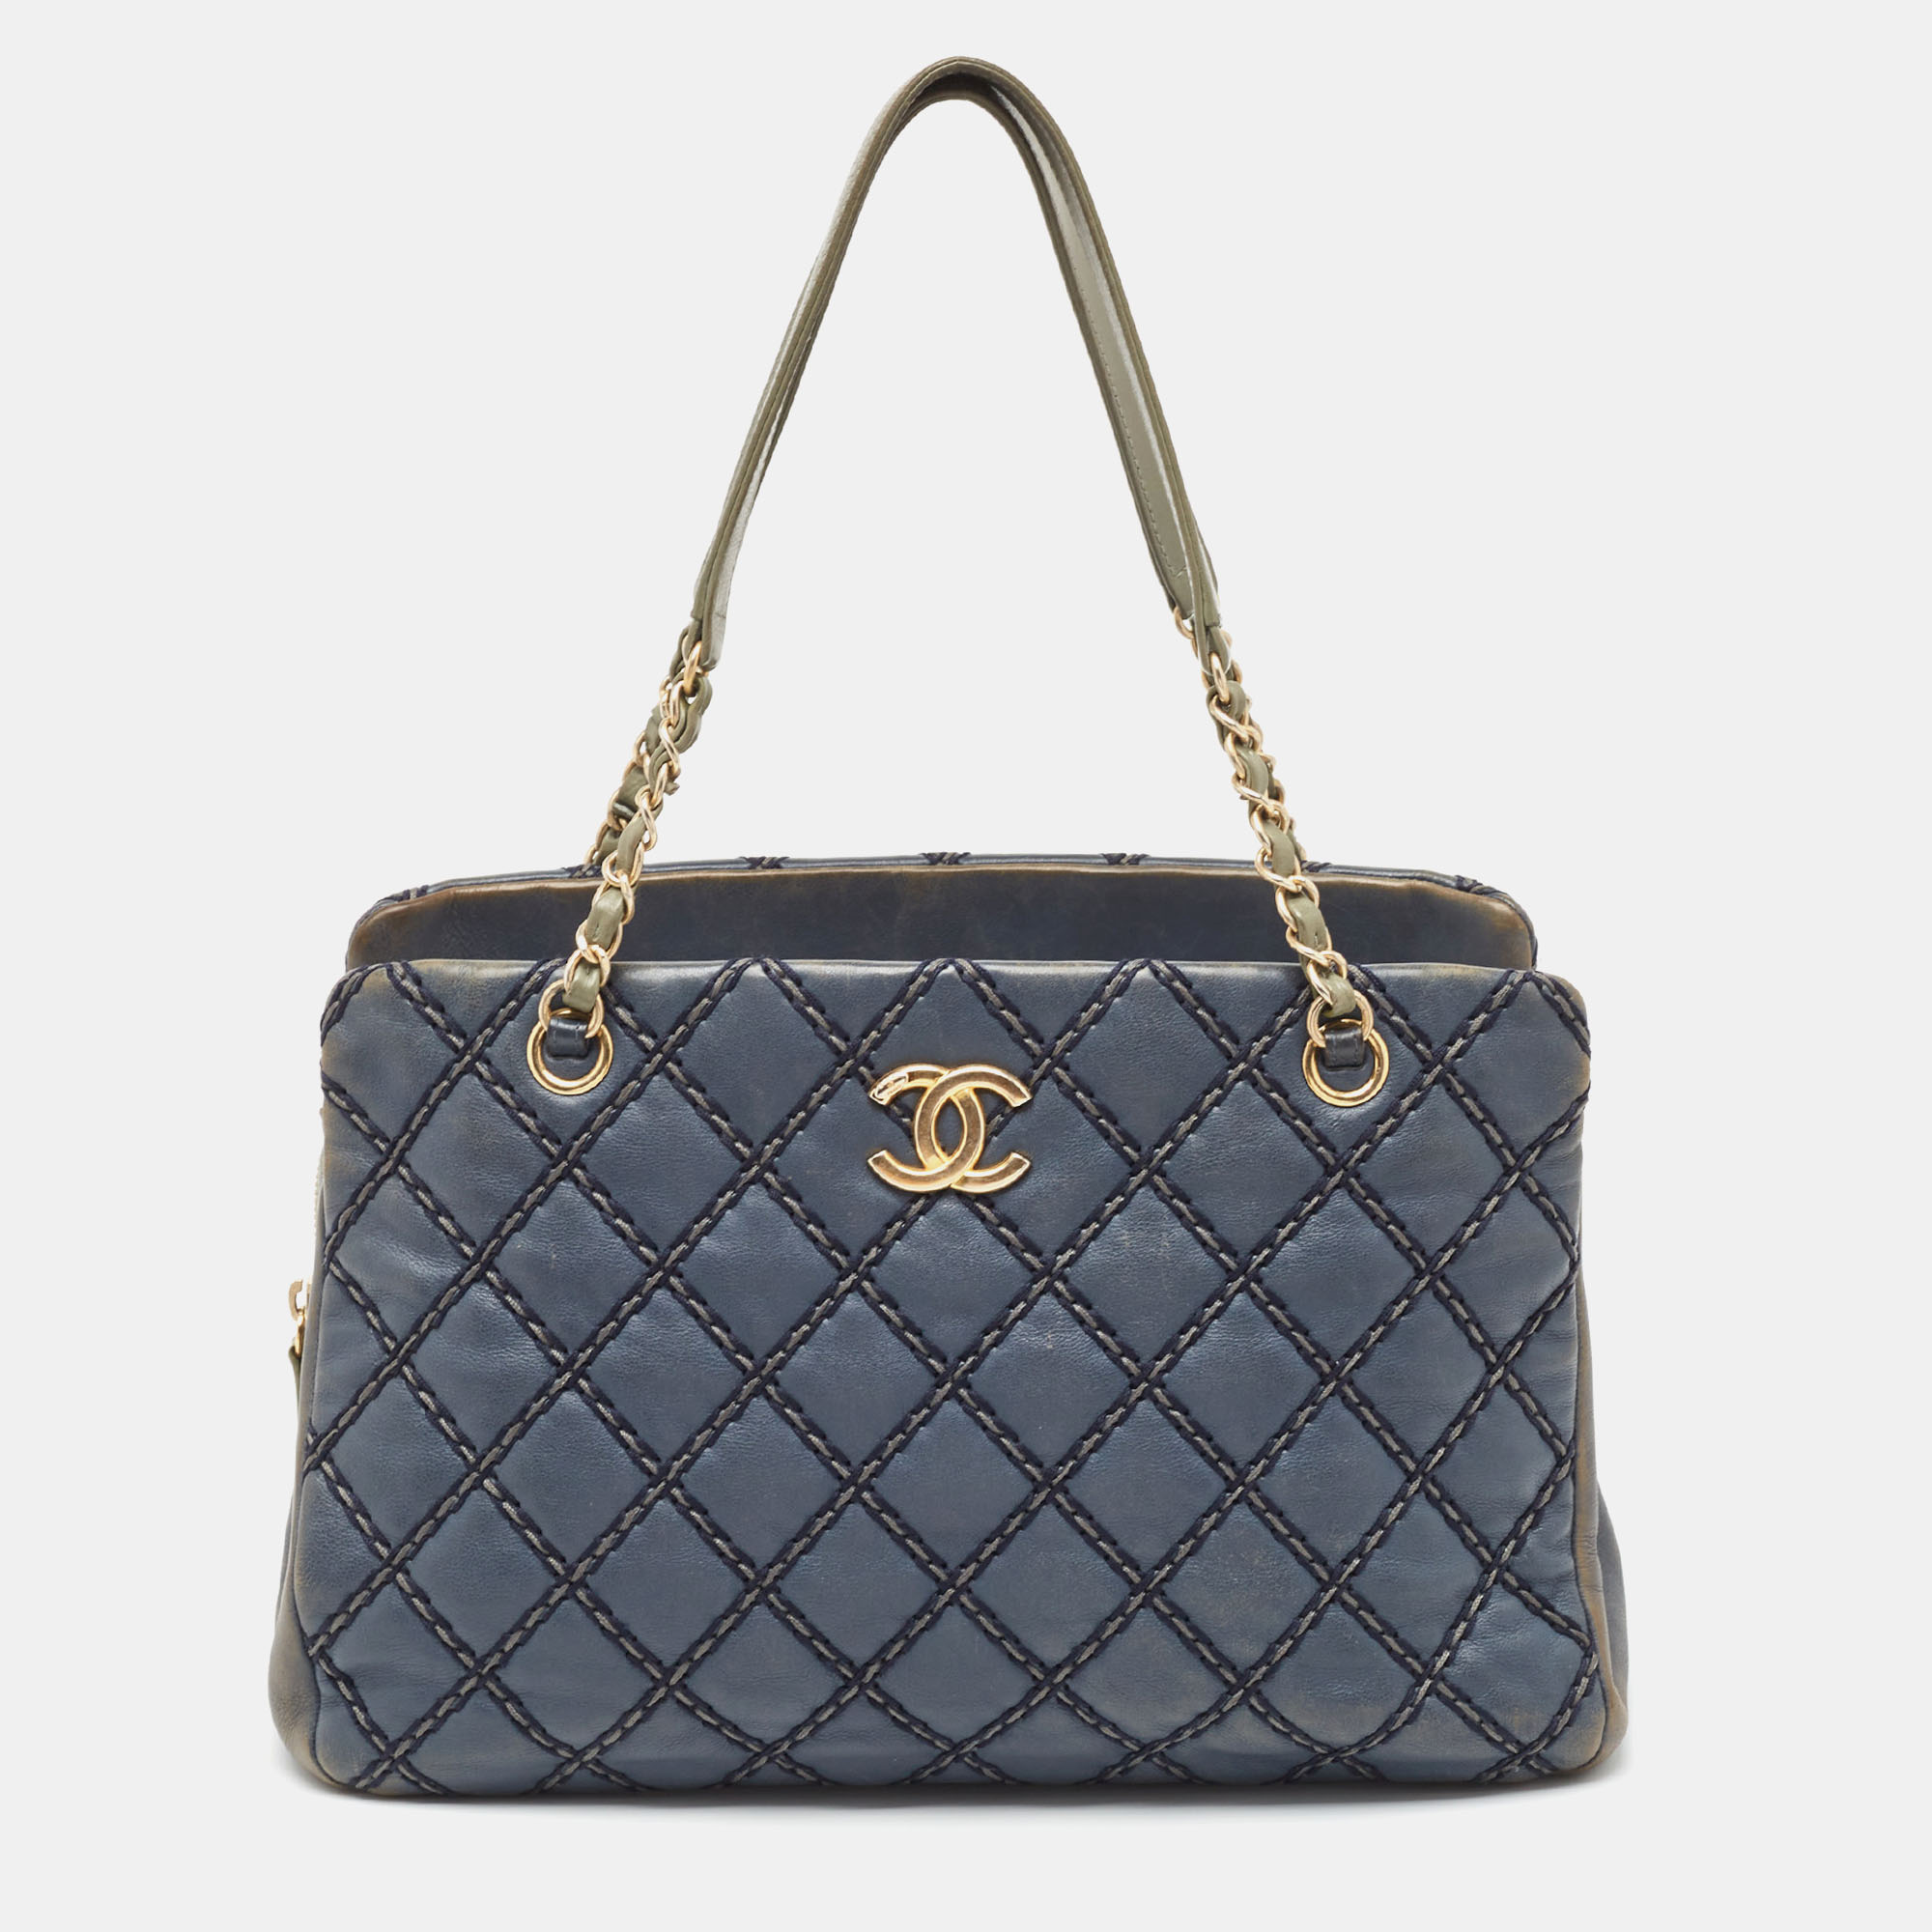 Pre-owned Chanel Blue Quilted Wild Stitched Leather Chain Tote